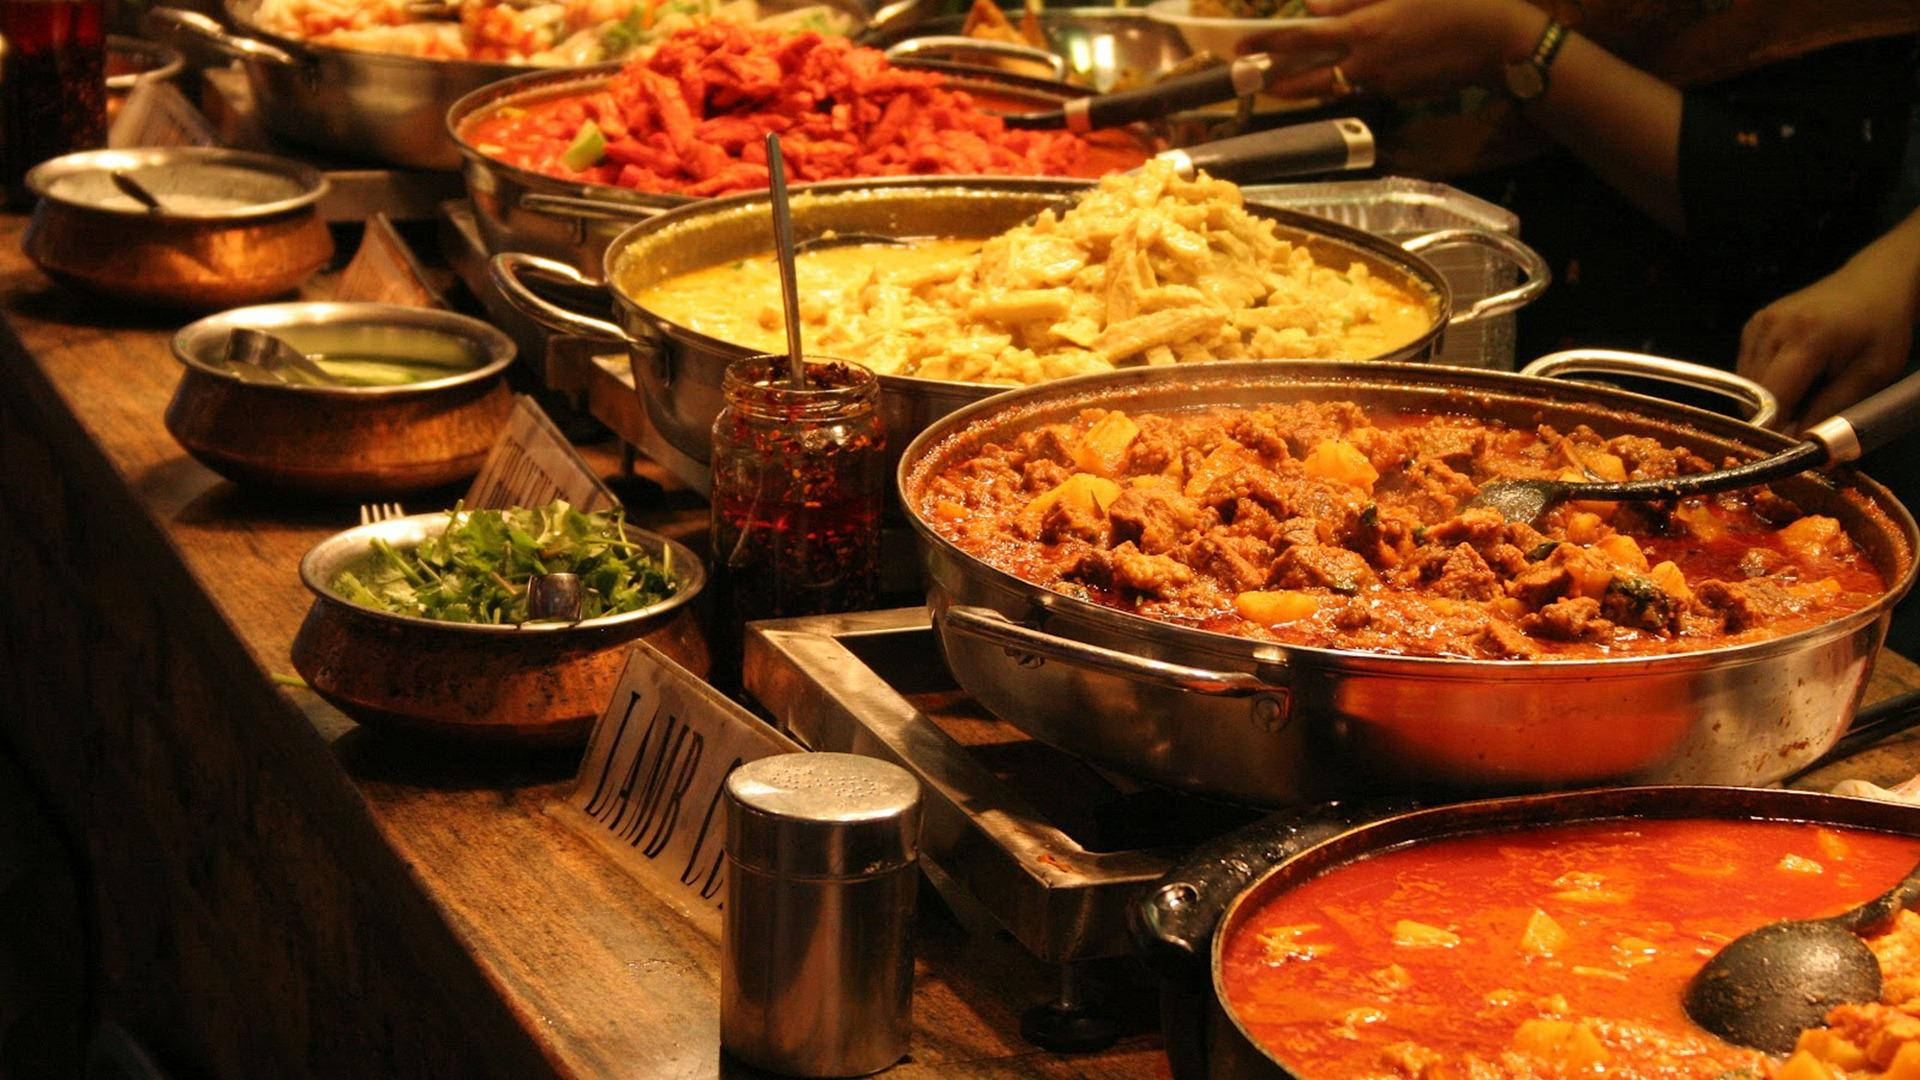 Awesome Indian Food Display